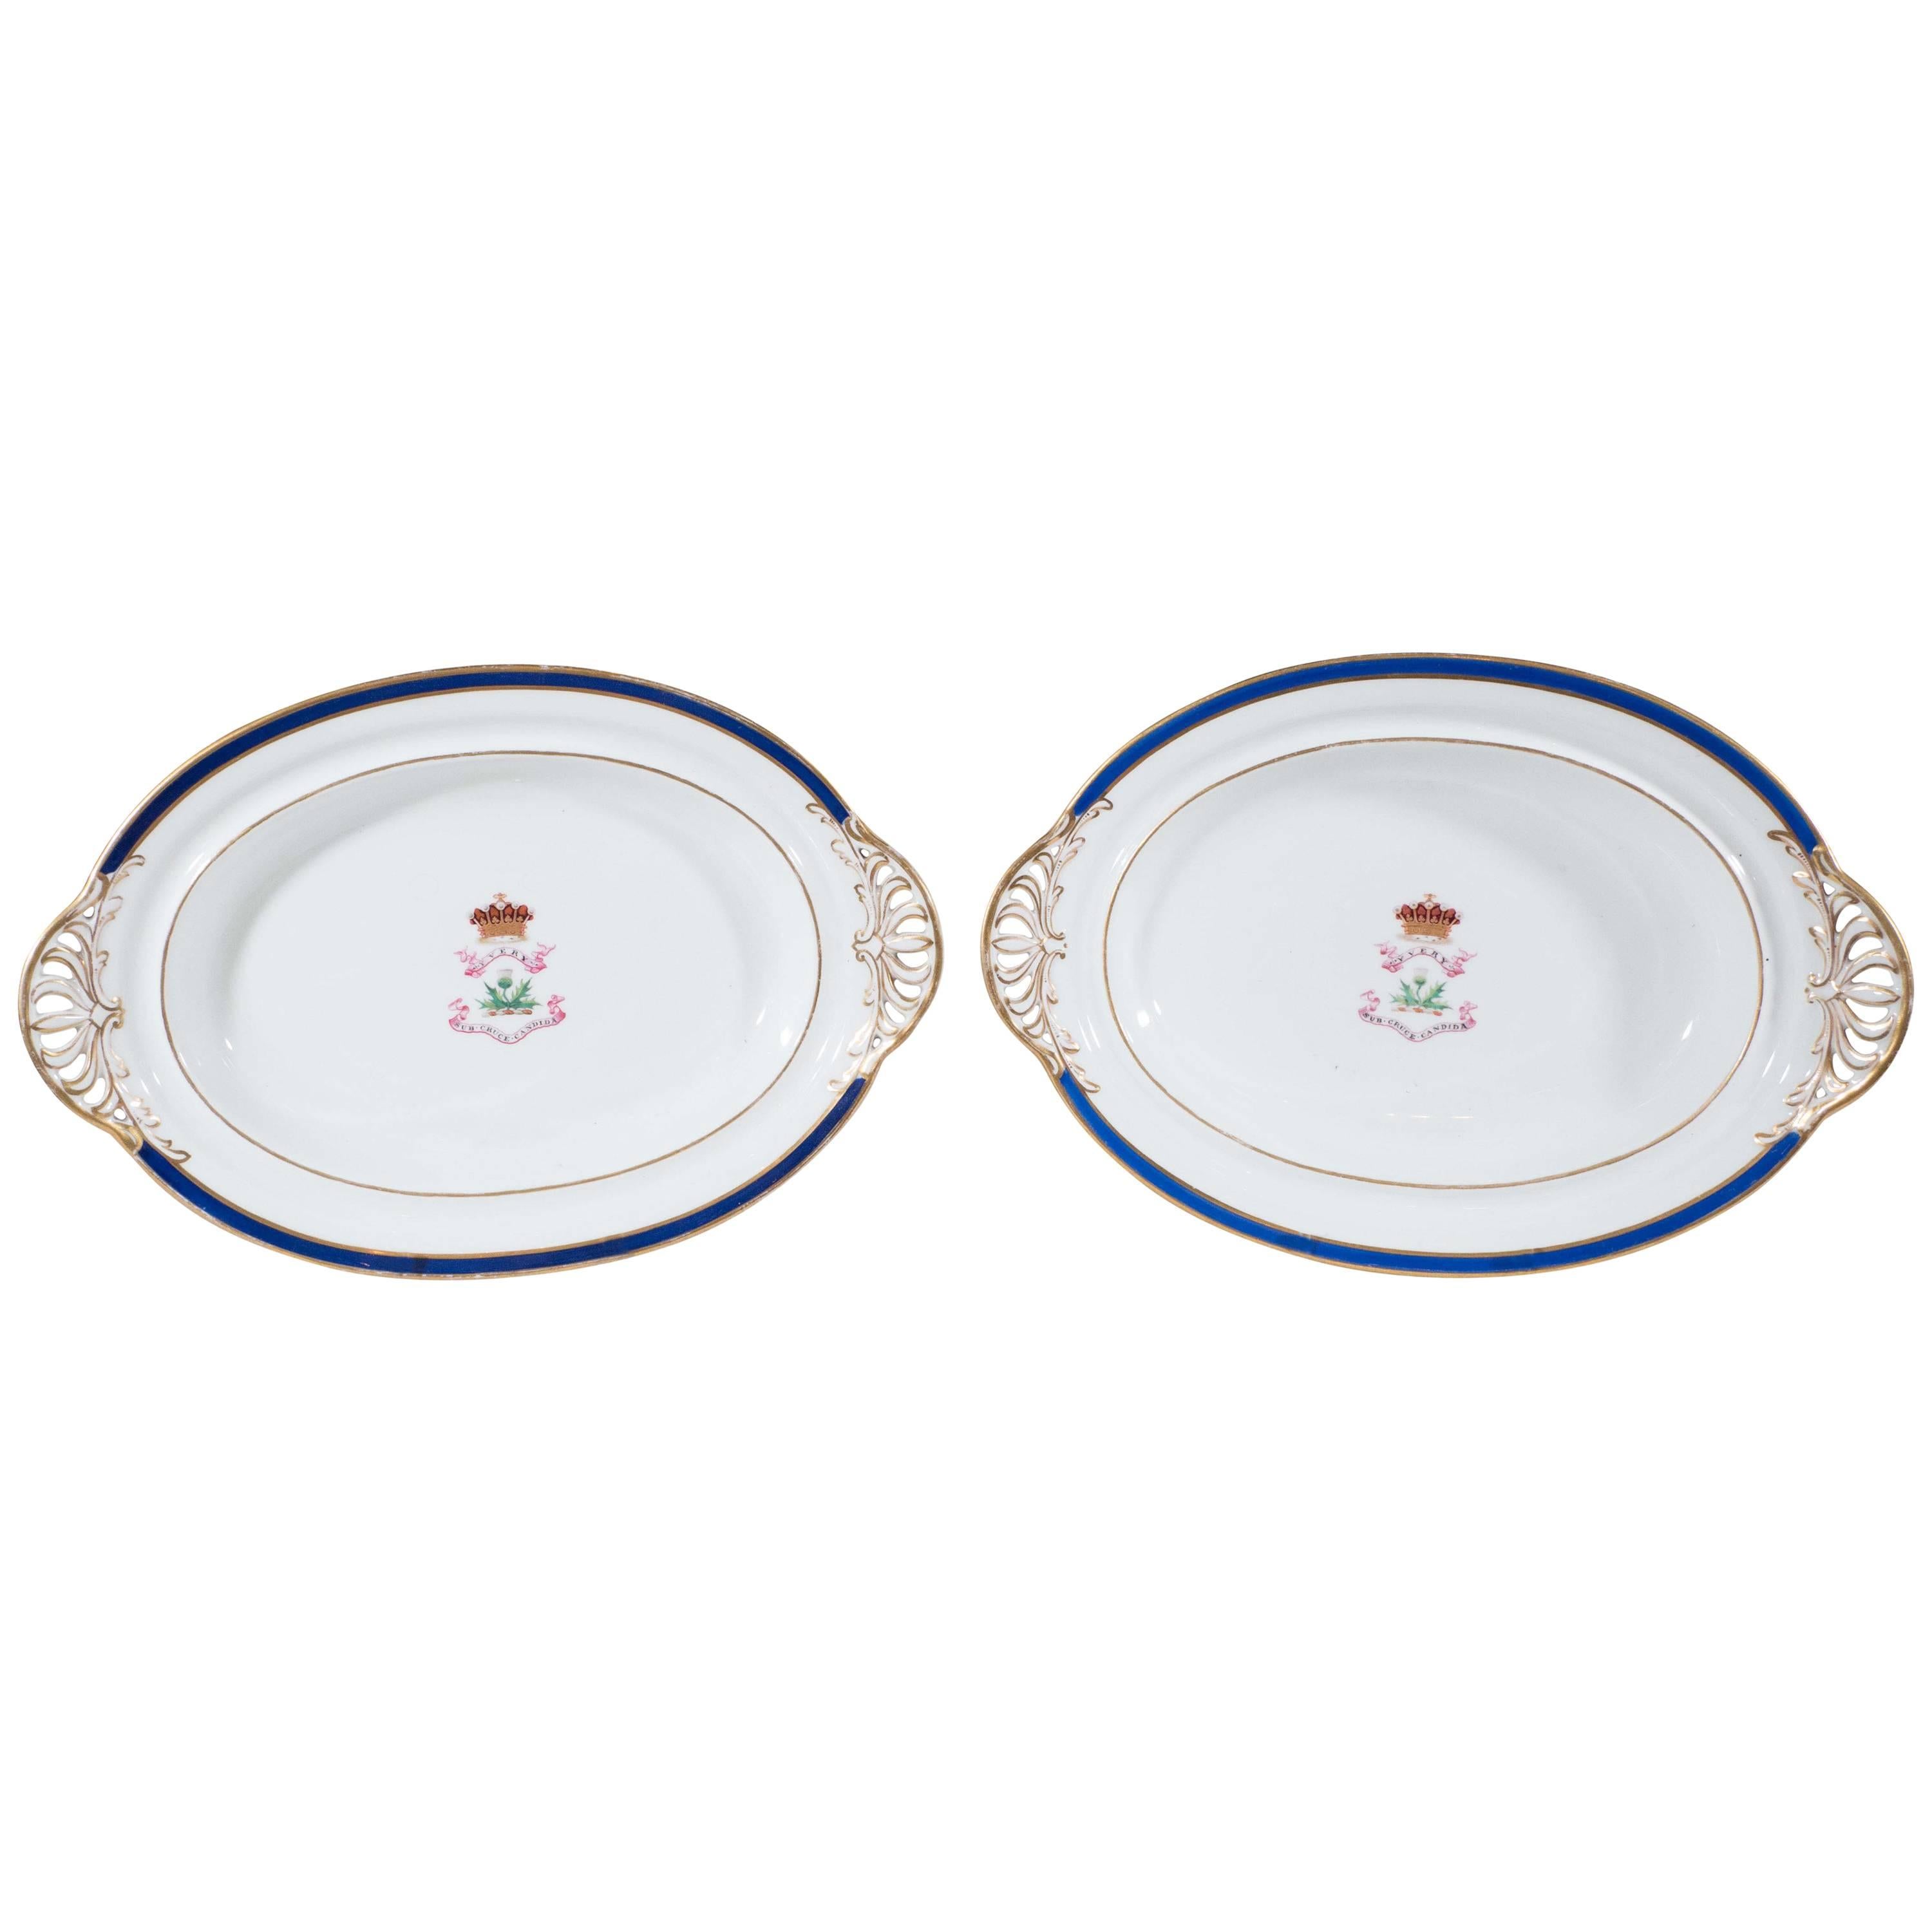 Antique Irish Armorial Dishes with the Arms of the Family of Perceval circa 1870